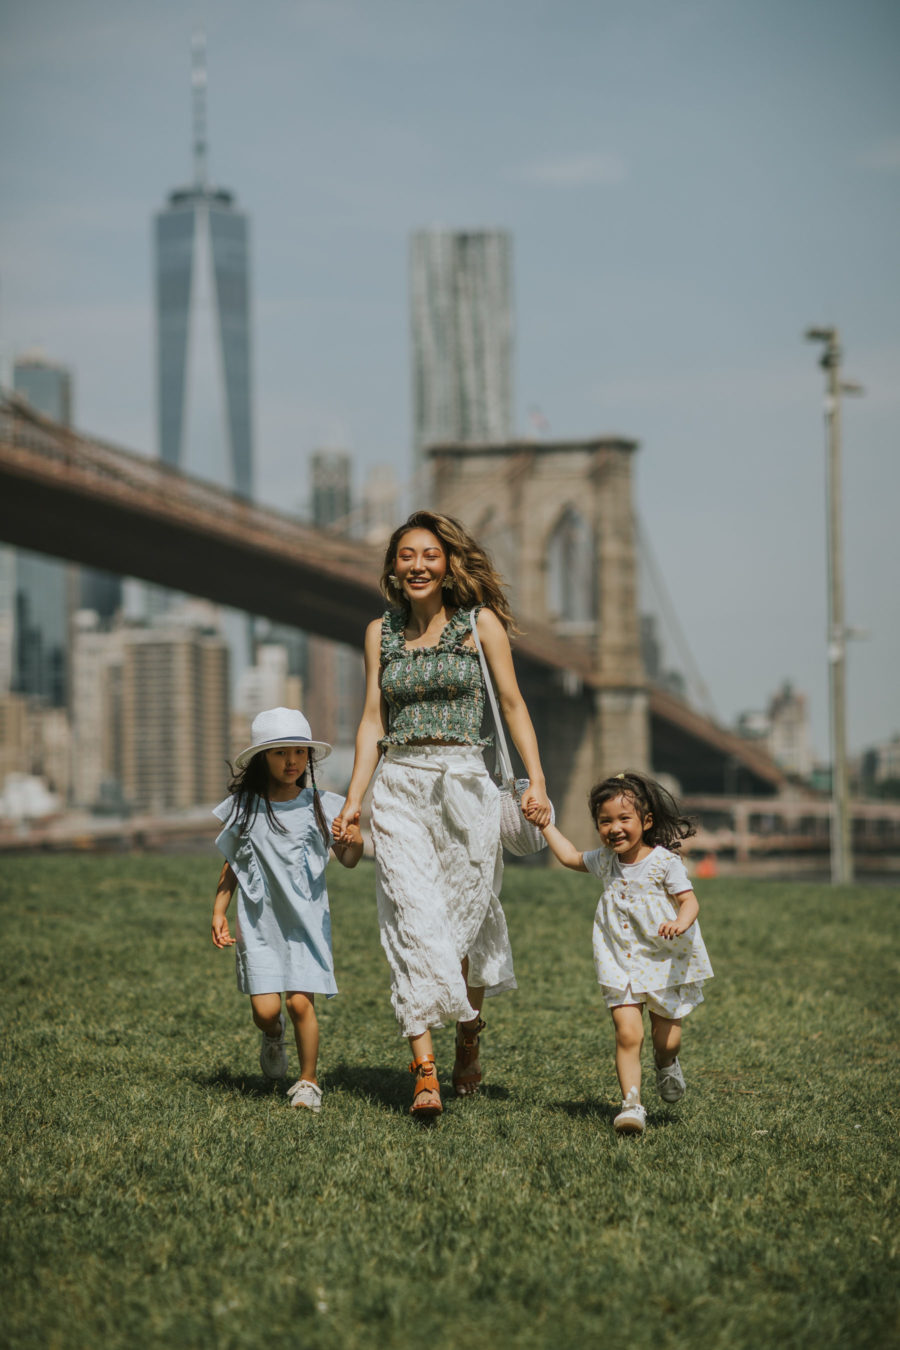 How I Spent My Memorial Day Weekend - smocked top, wrap skirt, summer outfit, casual summer outfit, cute kids fashion, nyc family trip // Notjessfashion.com